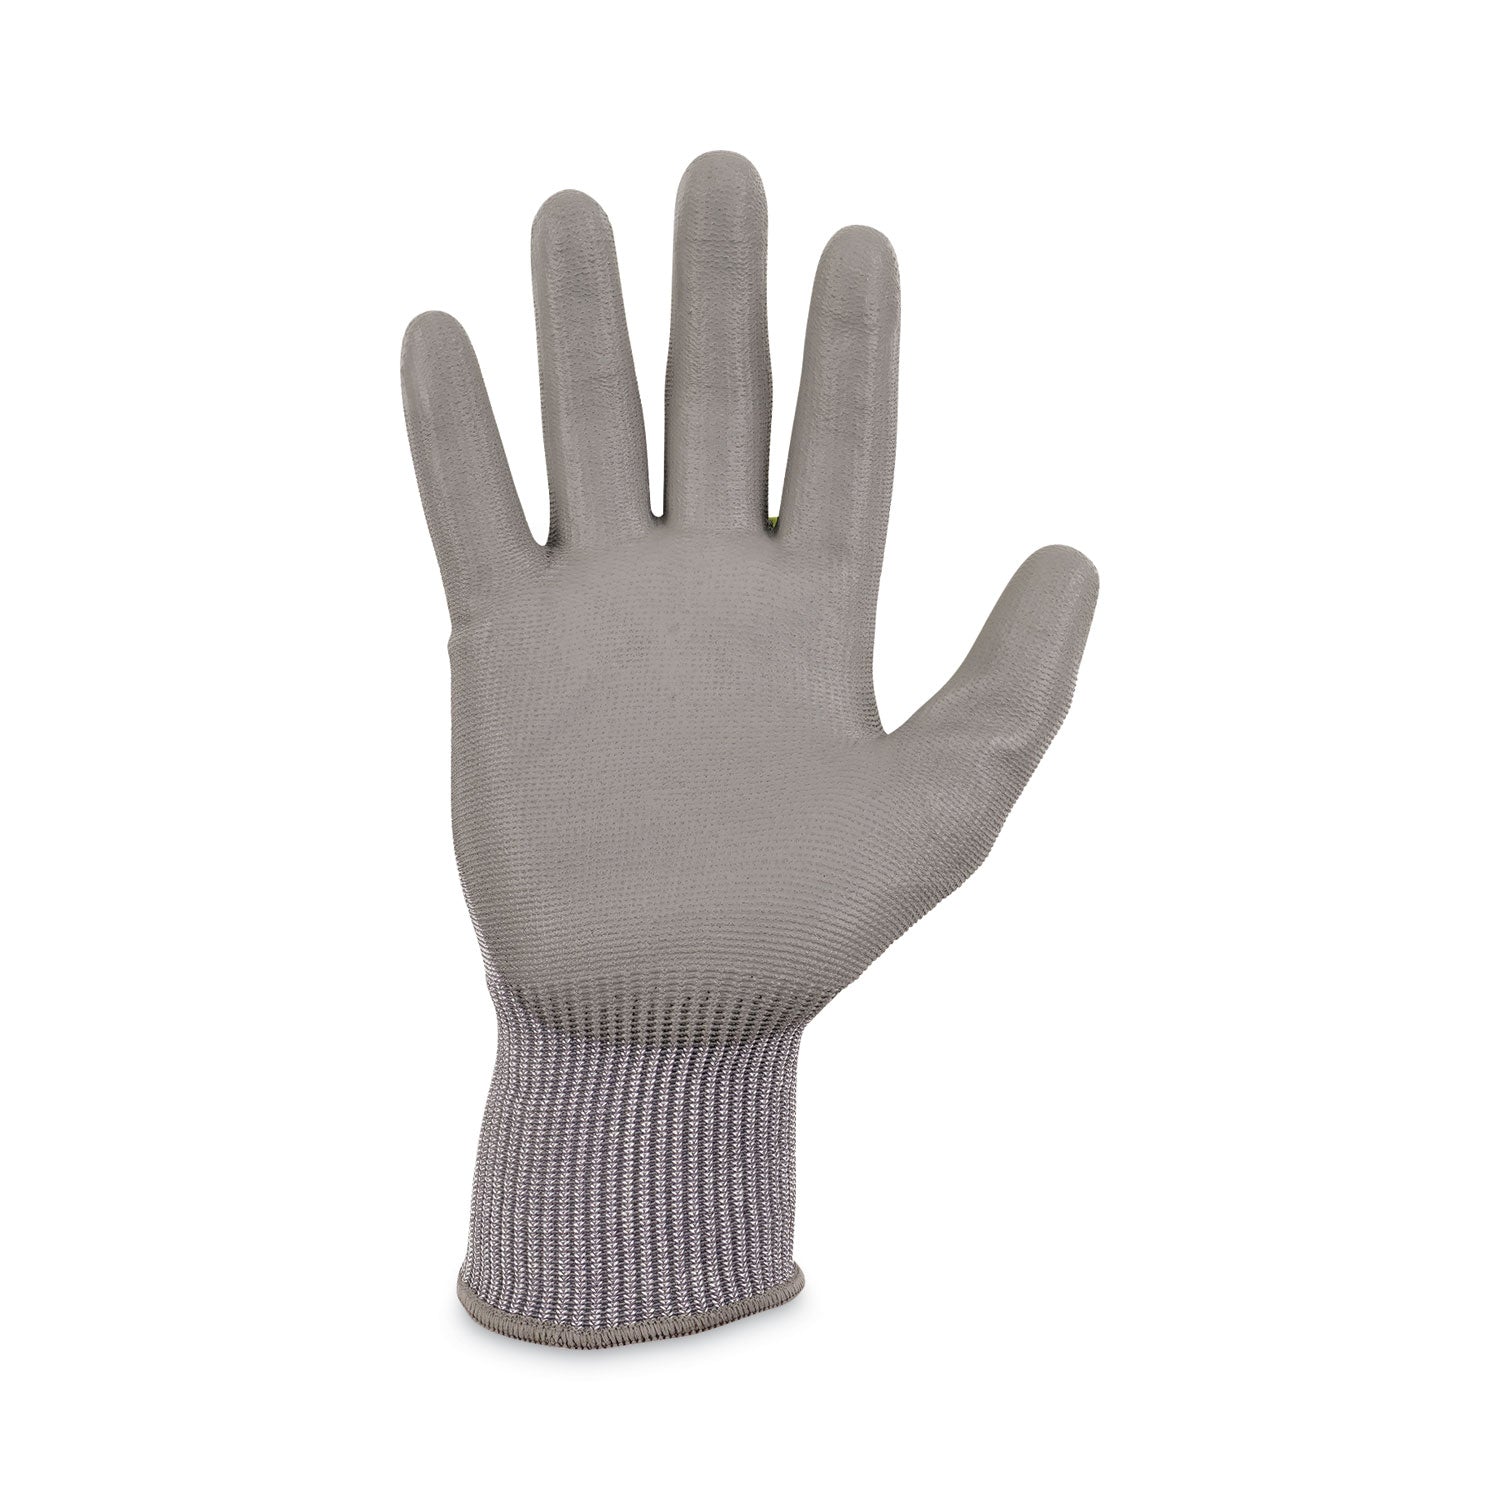 proflex-7024-ansi-a2-pu-coated-cr-gloves-gray-small-pair-ships-in-1-3-business-days_ego10402 - 8